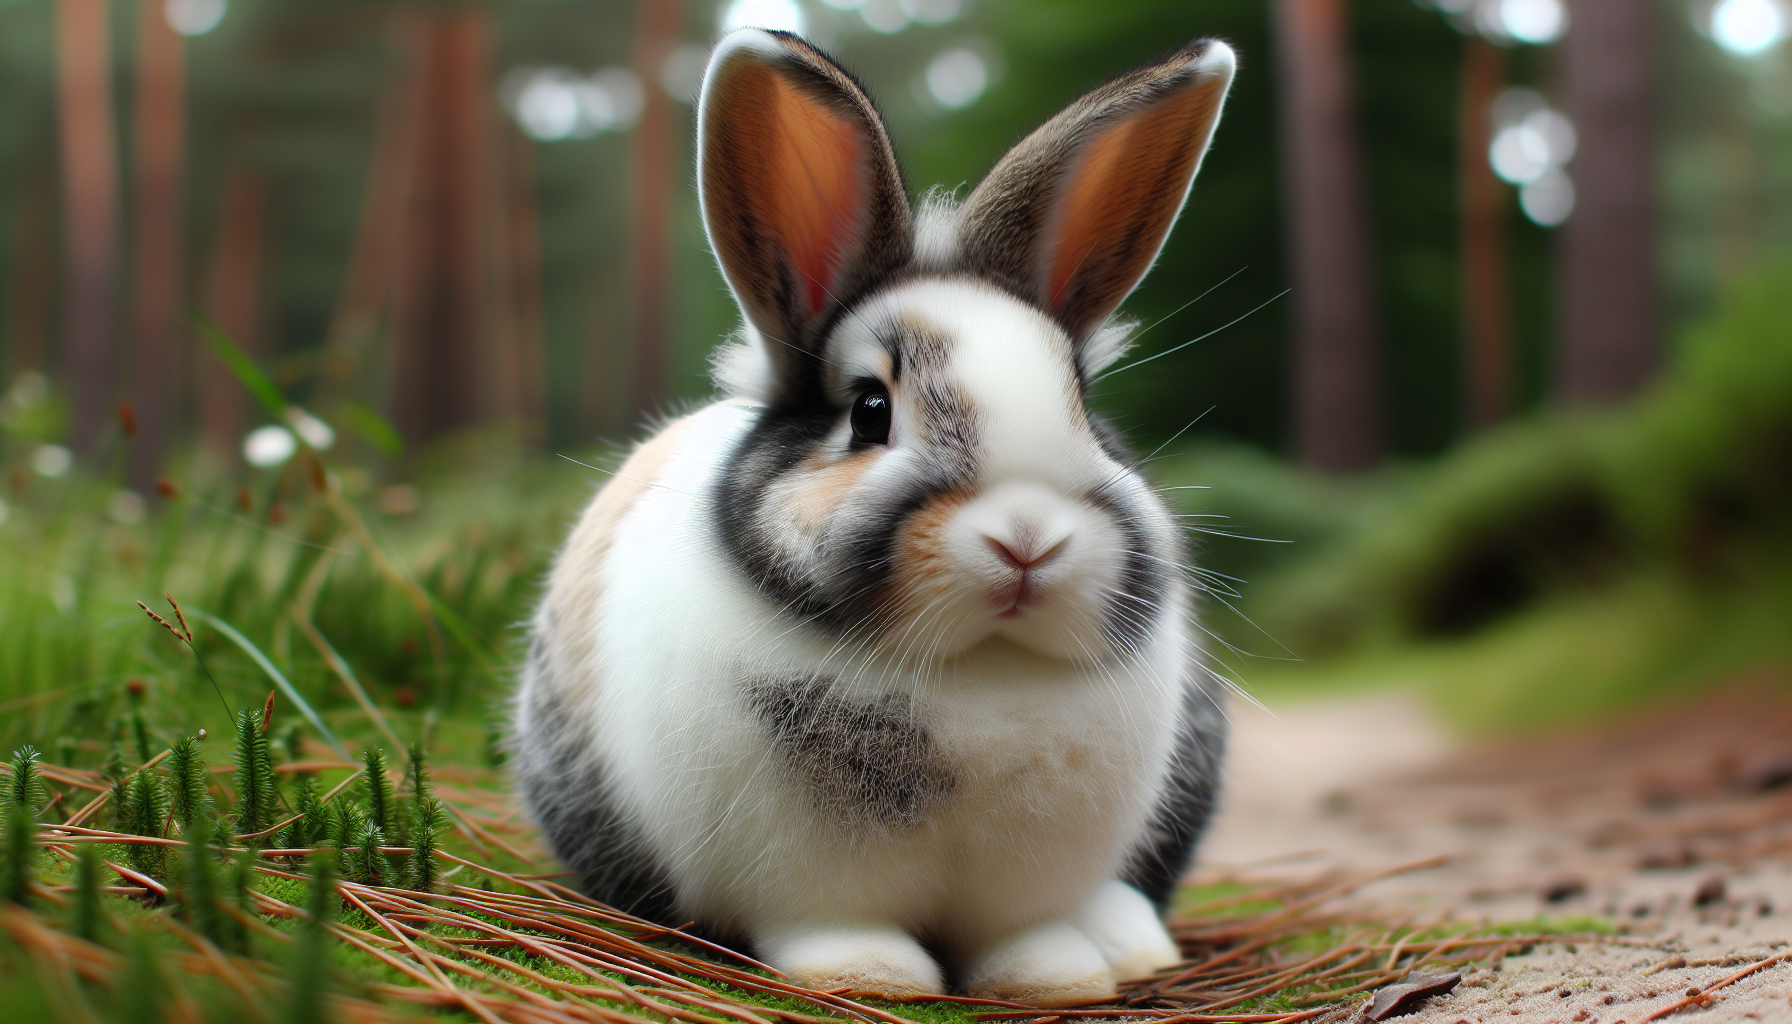 What is the maximum size of a Dutch rabbit?